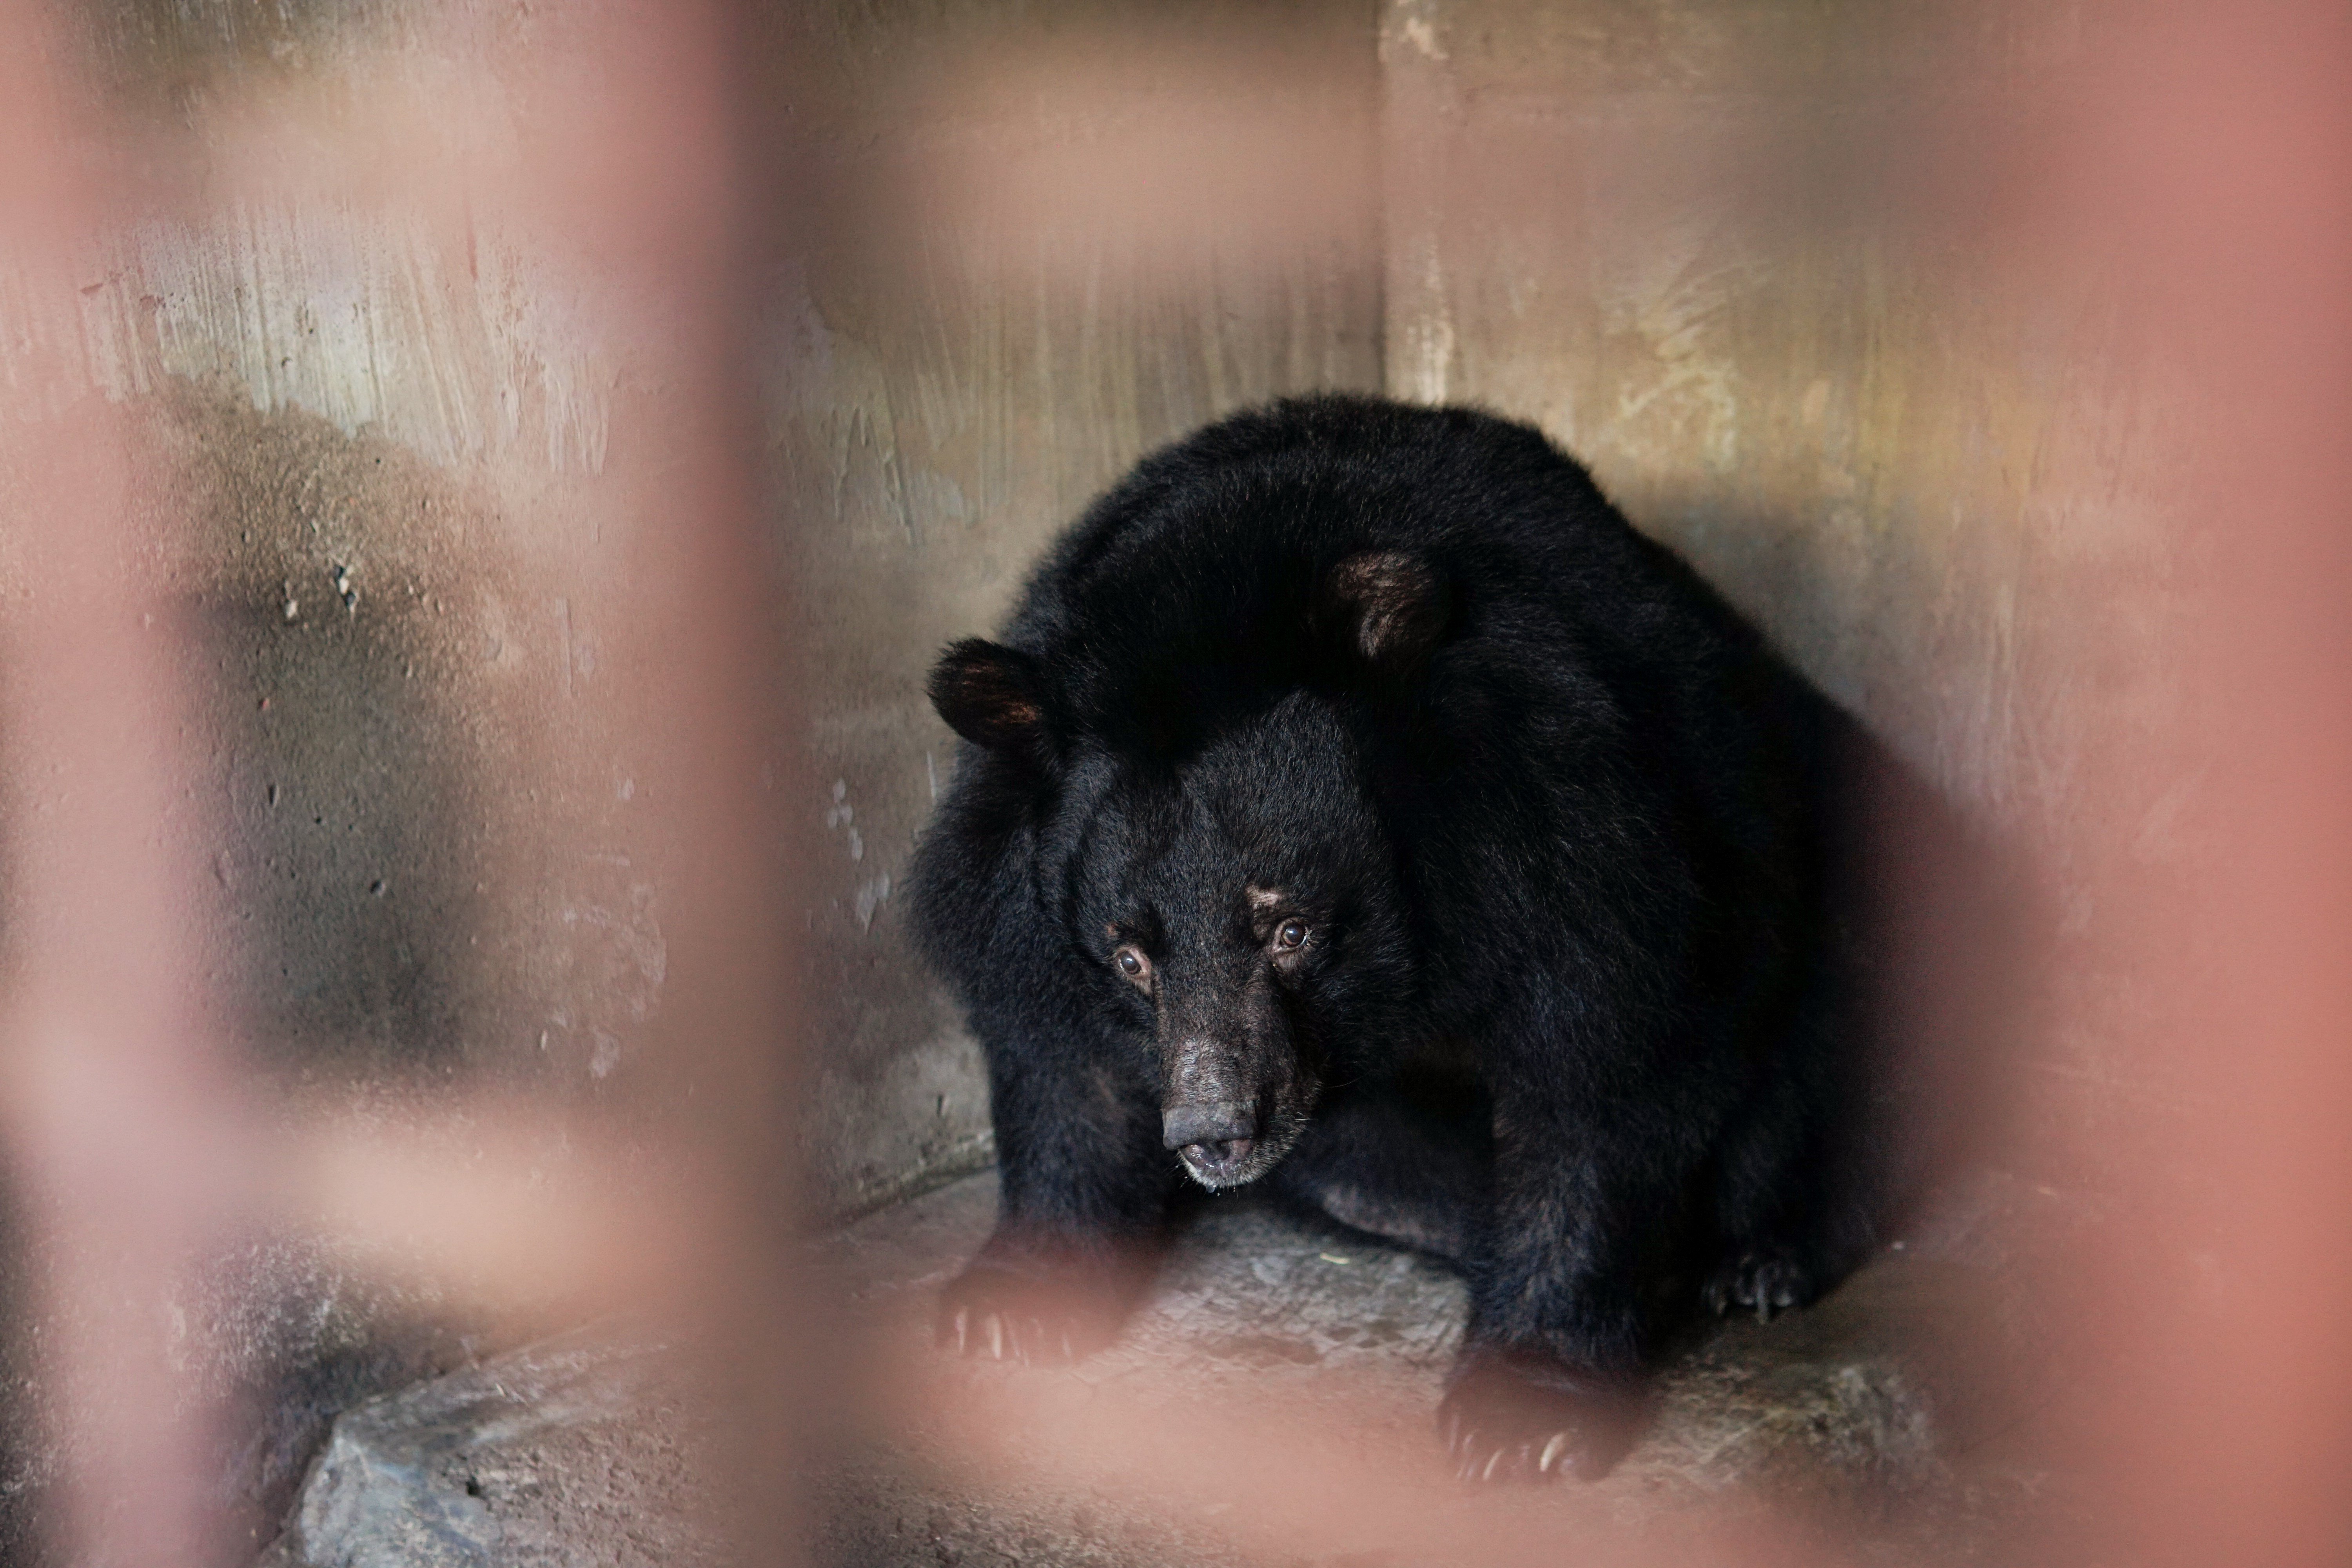 One of the bears at Vu Van Hien (Thai Thuy) farm on day one of the rescue